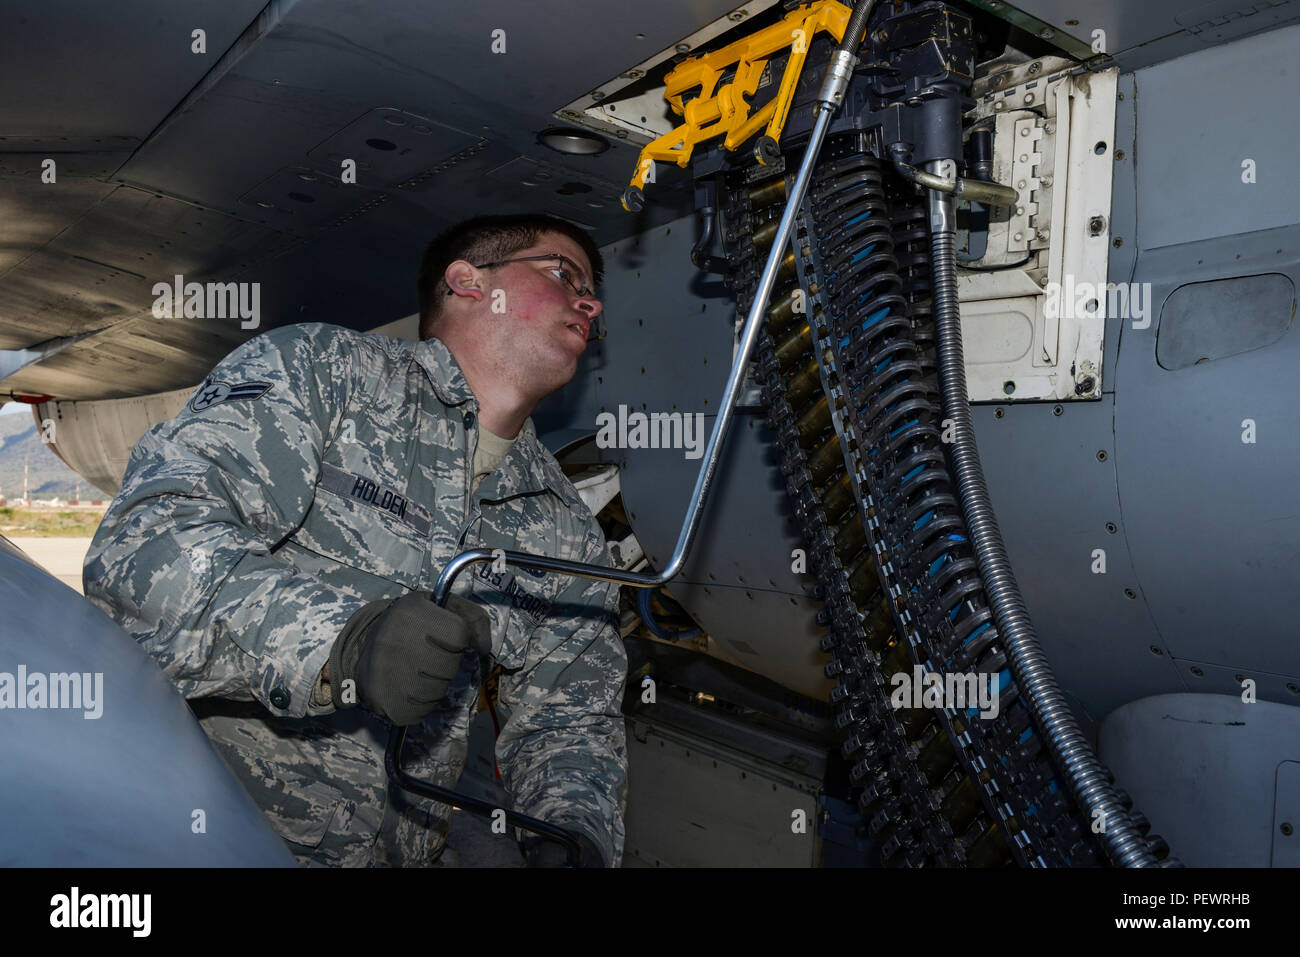 U.S. Air Force Airman 1st Class Austin Holden, a weapons load crew member assigned to the 480th Expeditionary Fighter Squadron, Spangdahlem Air Base, Germany, uses a universal ammunition loading system to load 20 mm practice rounds into an F-16 Fighting Falcon fighter aircraft during a flying training deployment on the flightline at Souda Bay, Greece, Jan. 29, 2016.The inert munitions used during the FTD simulate real conditions the 480th EFS pilots might use when engaging enemy forces. (U.S. Air Force photo by Staff Sgt. Christopher Ruano/Released) Stock Photo